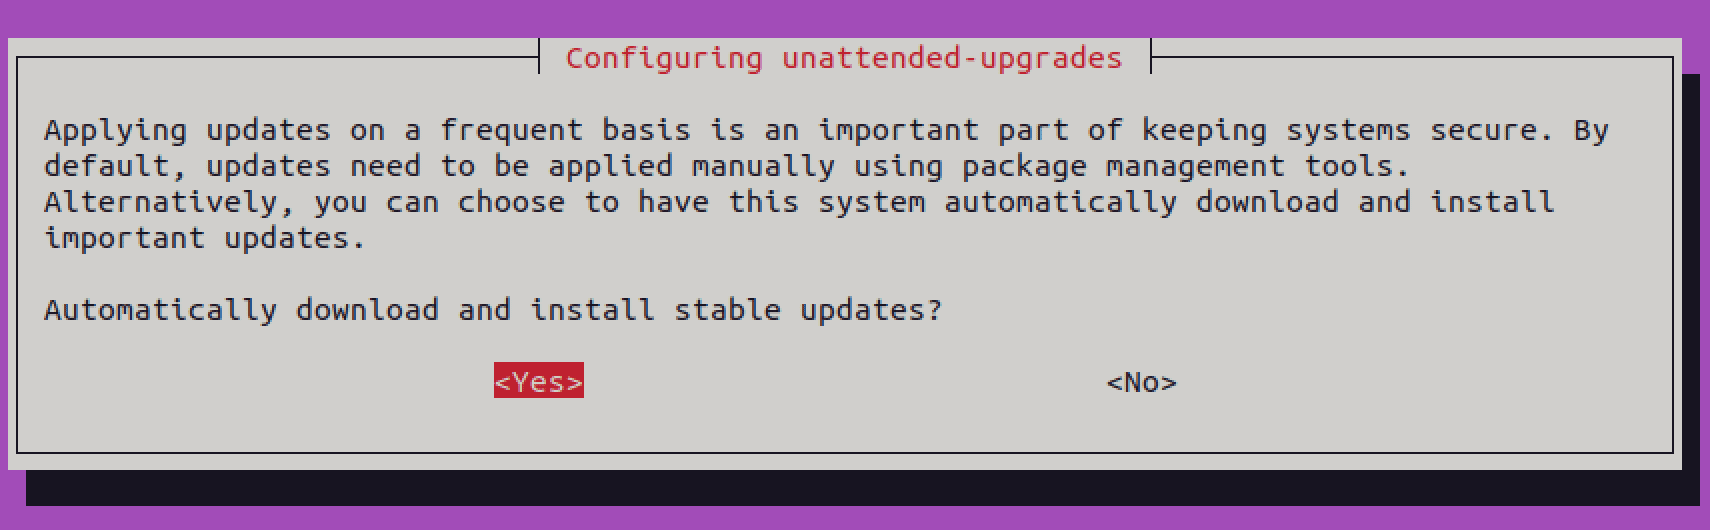 enable unattended upgrades